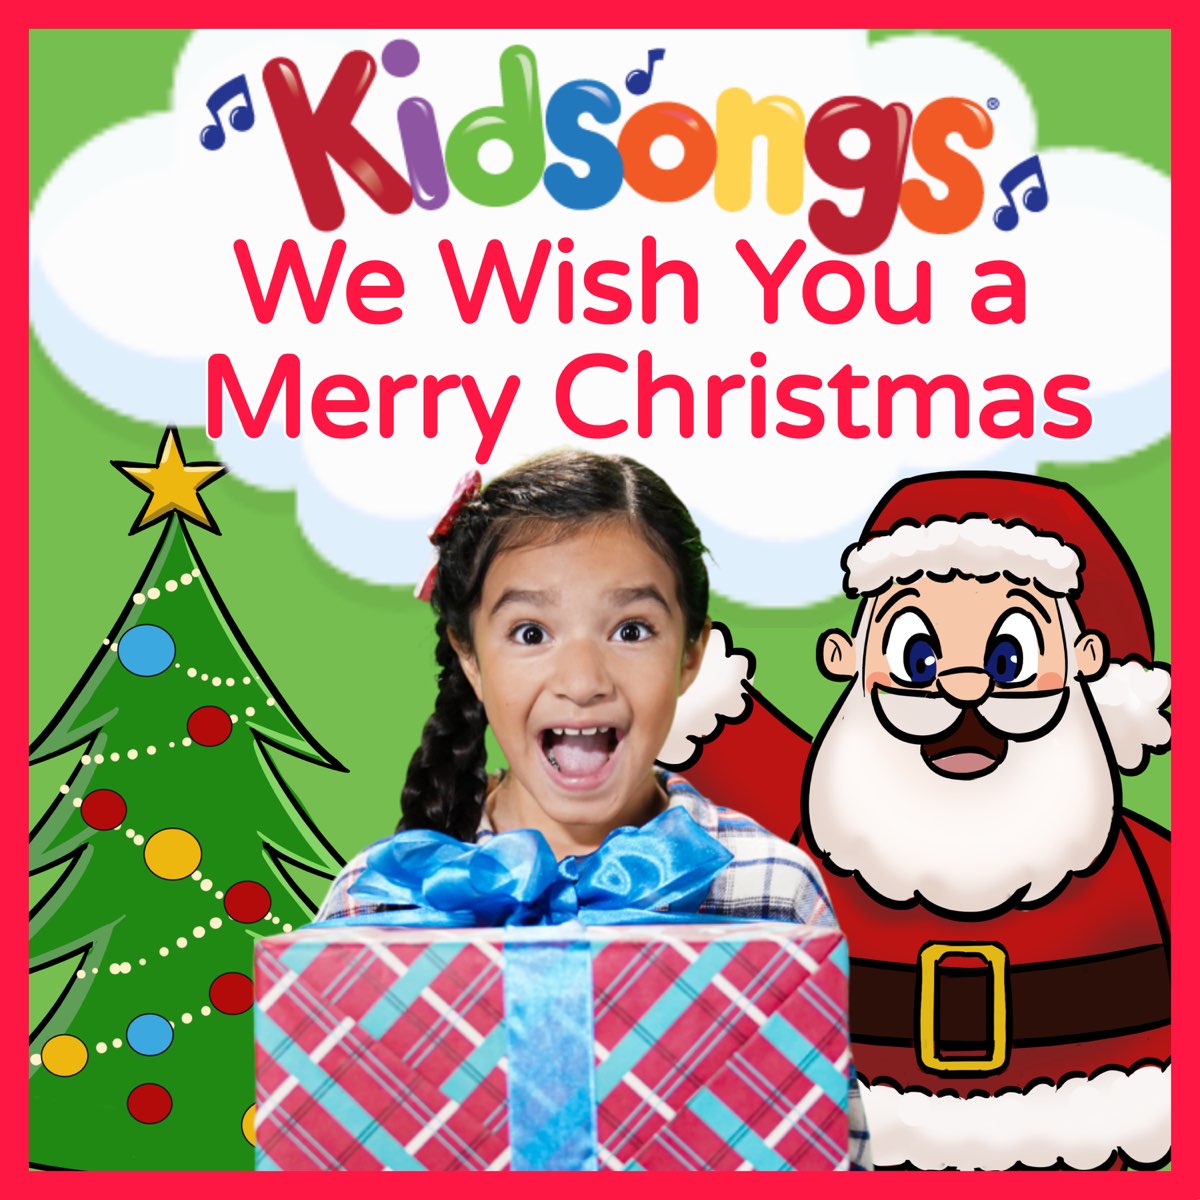 kidsongs-we-wish-you-a-merry-christmas-by-kidsongs-on-apple-music